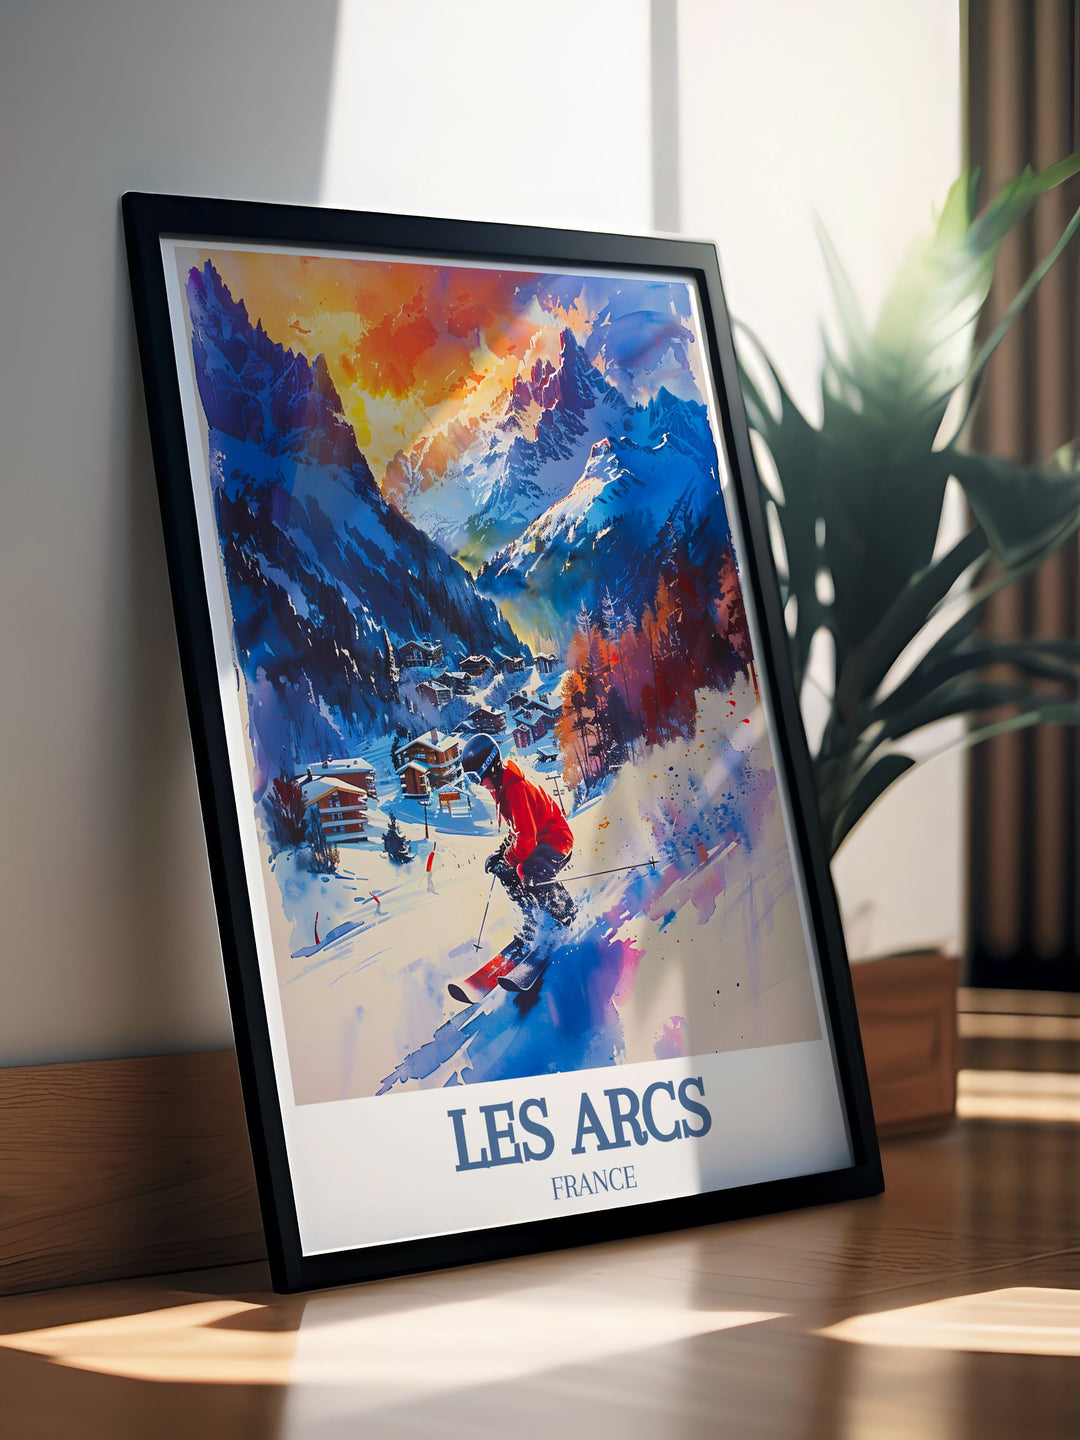 Snowboarding Art featuring Les Arcs in Paradiski ski area Mont Blanc with detailed illustrations of dynamic snowboarding scenes perfect for wall art and enhancing snowboard decor